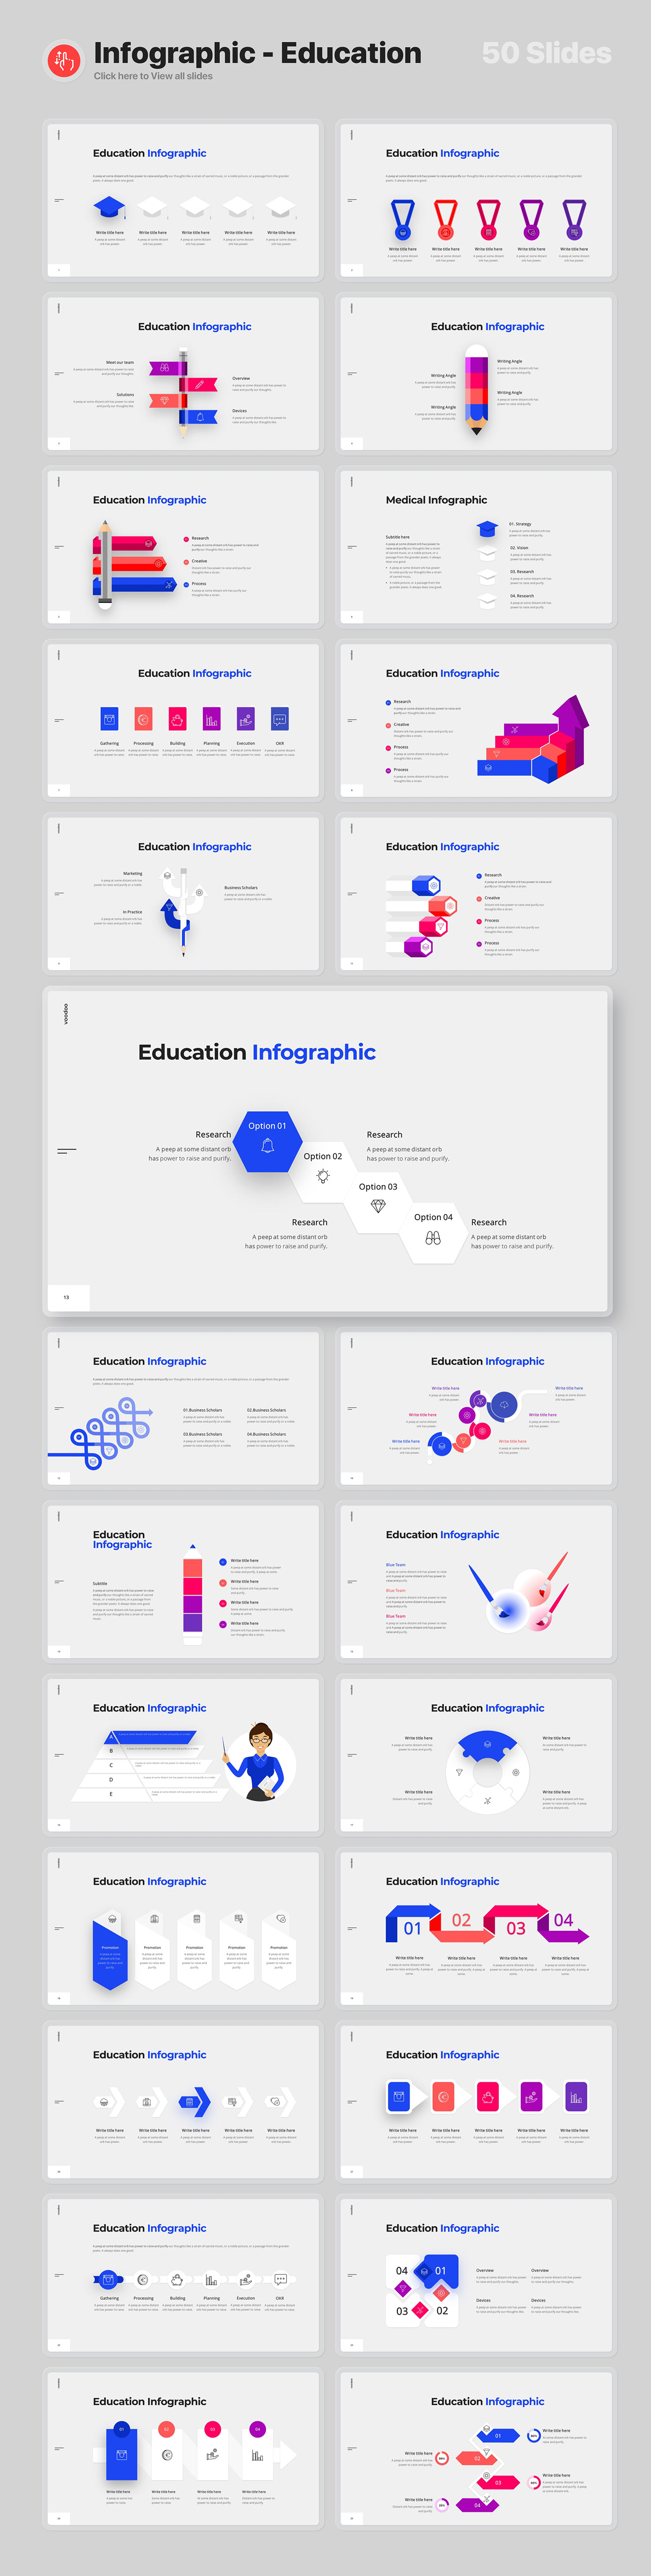 free free powerpoint free keynote Powerpoint Keynote presentation slide free infographic infographic Free Template